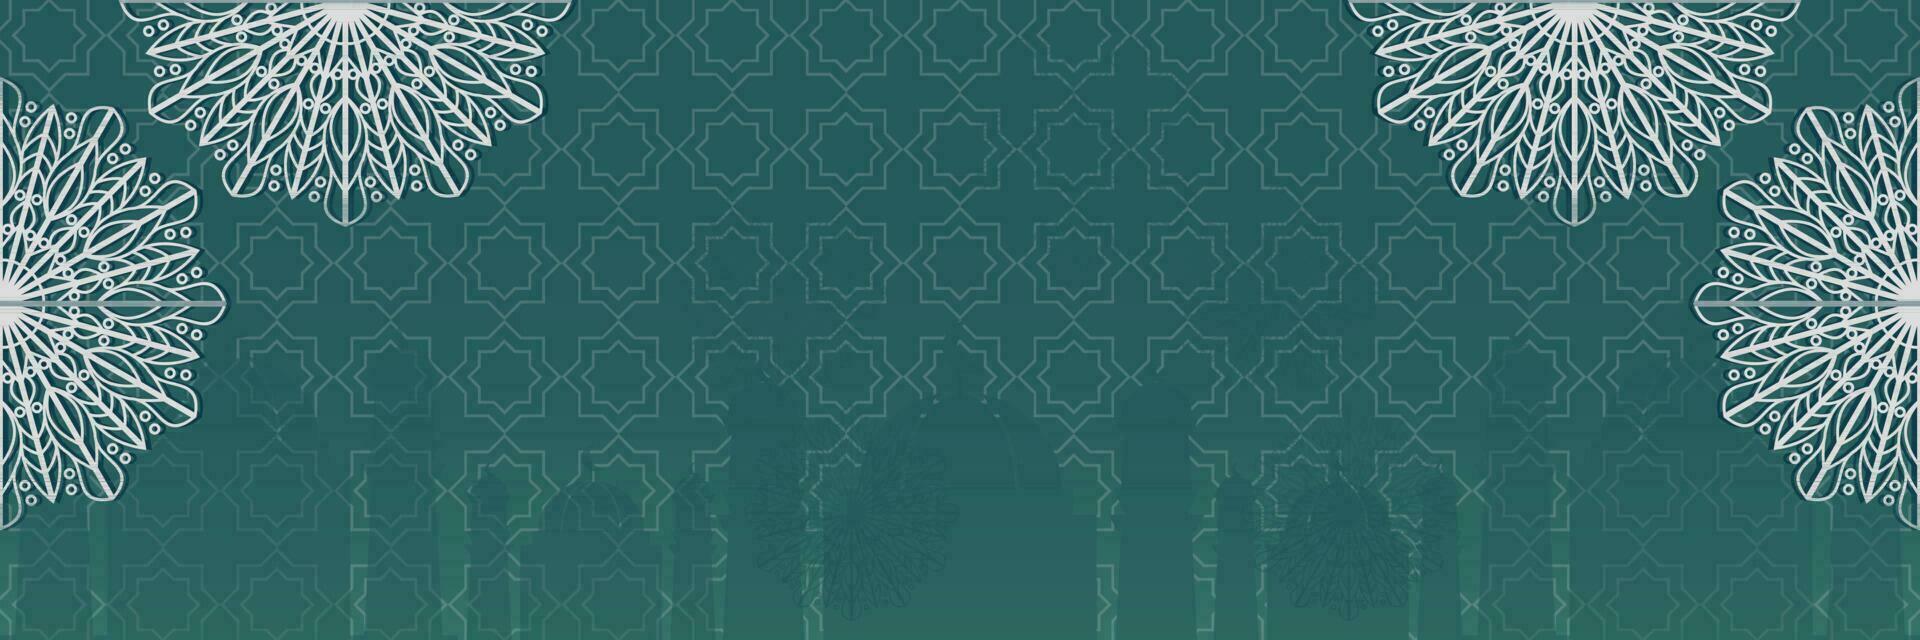 Islamic green background, with beautiful mandala ornament. vector template for banners, greeting cards for Islamic holidays.